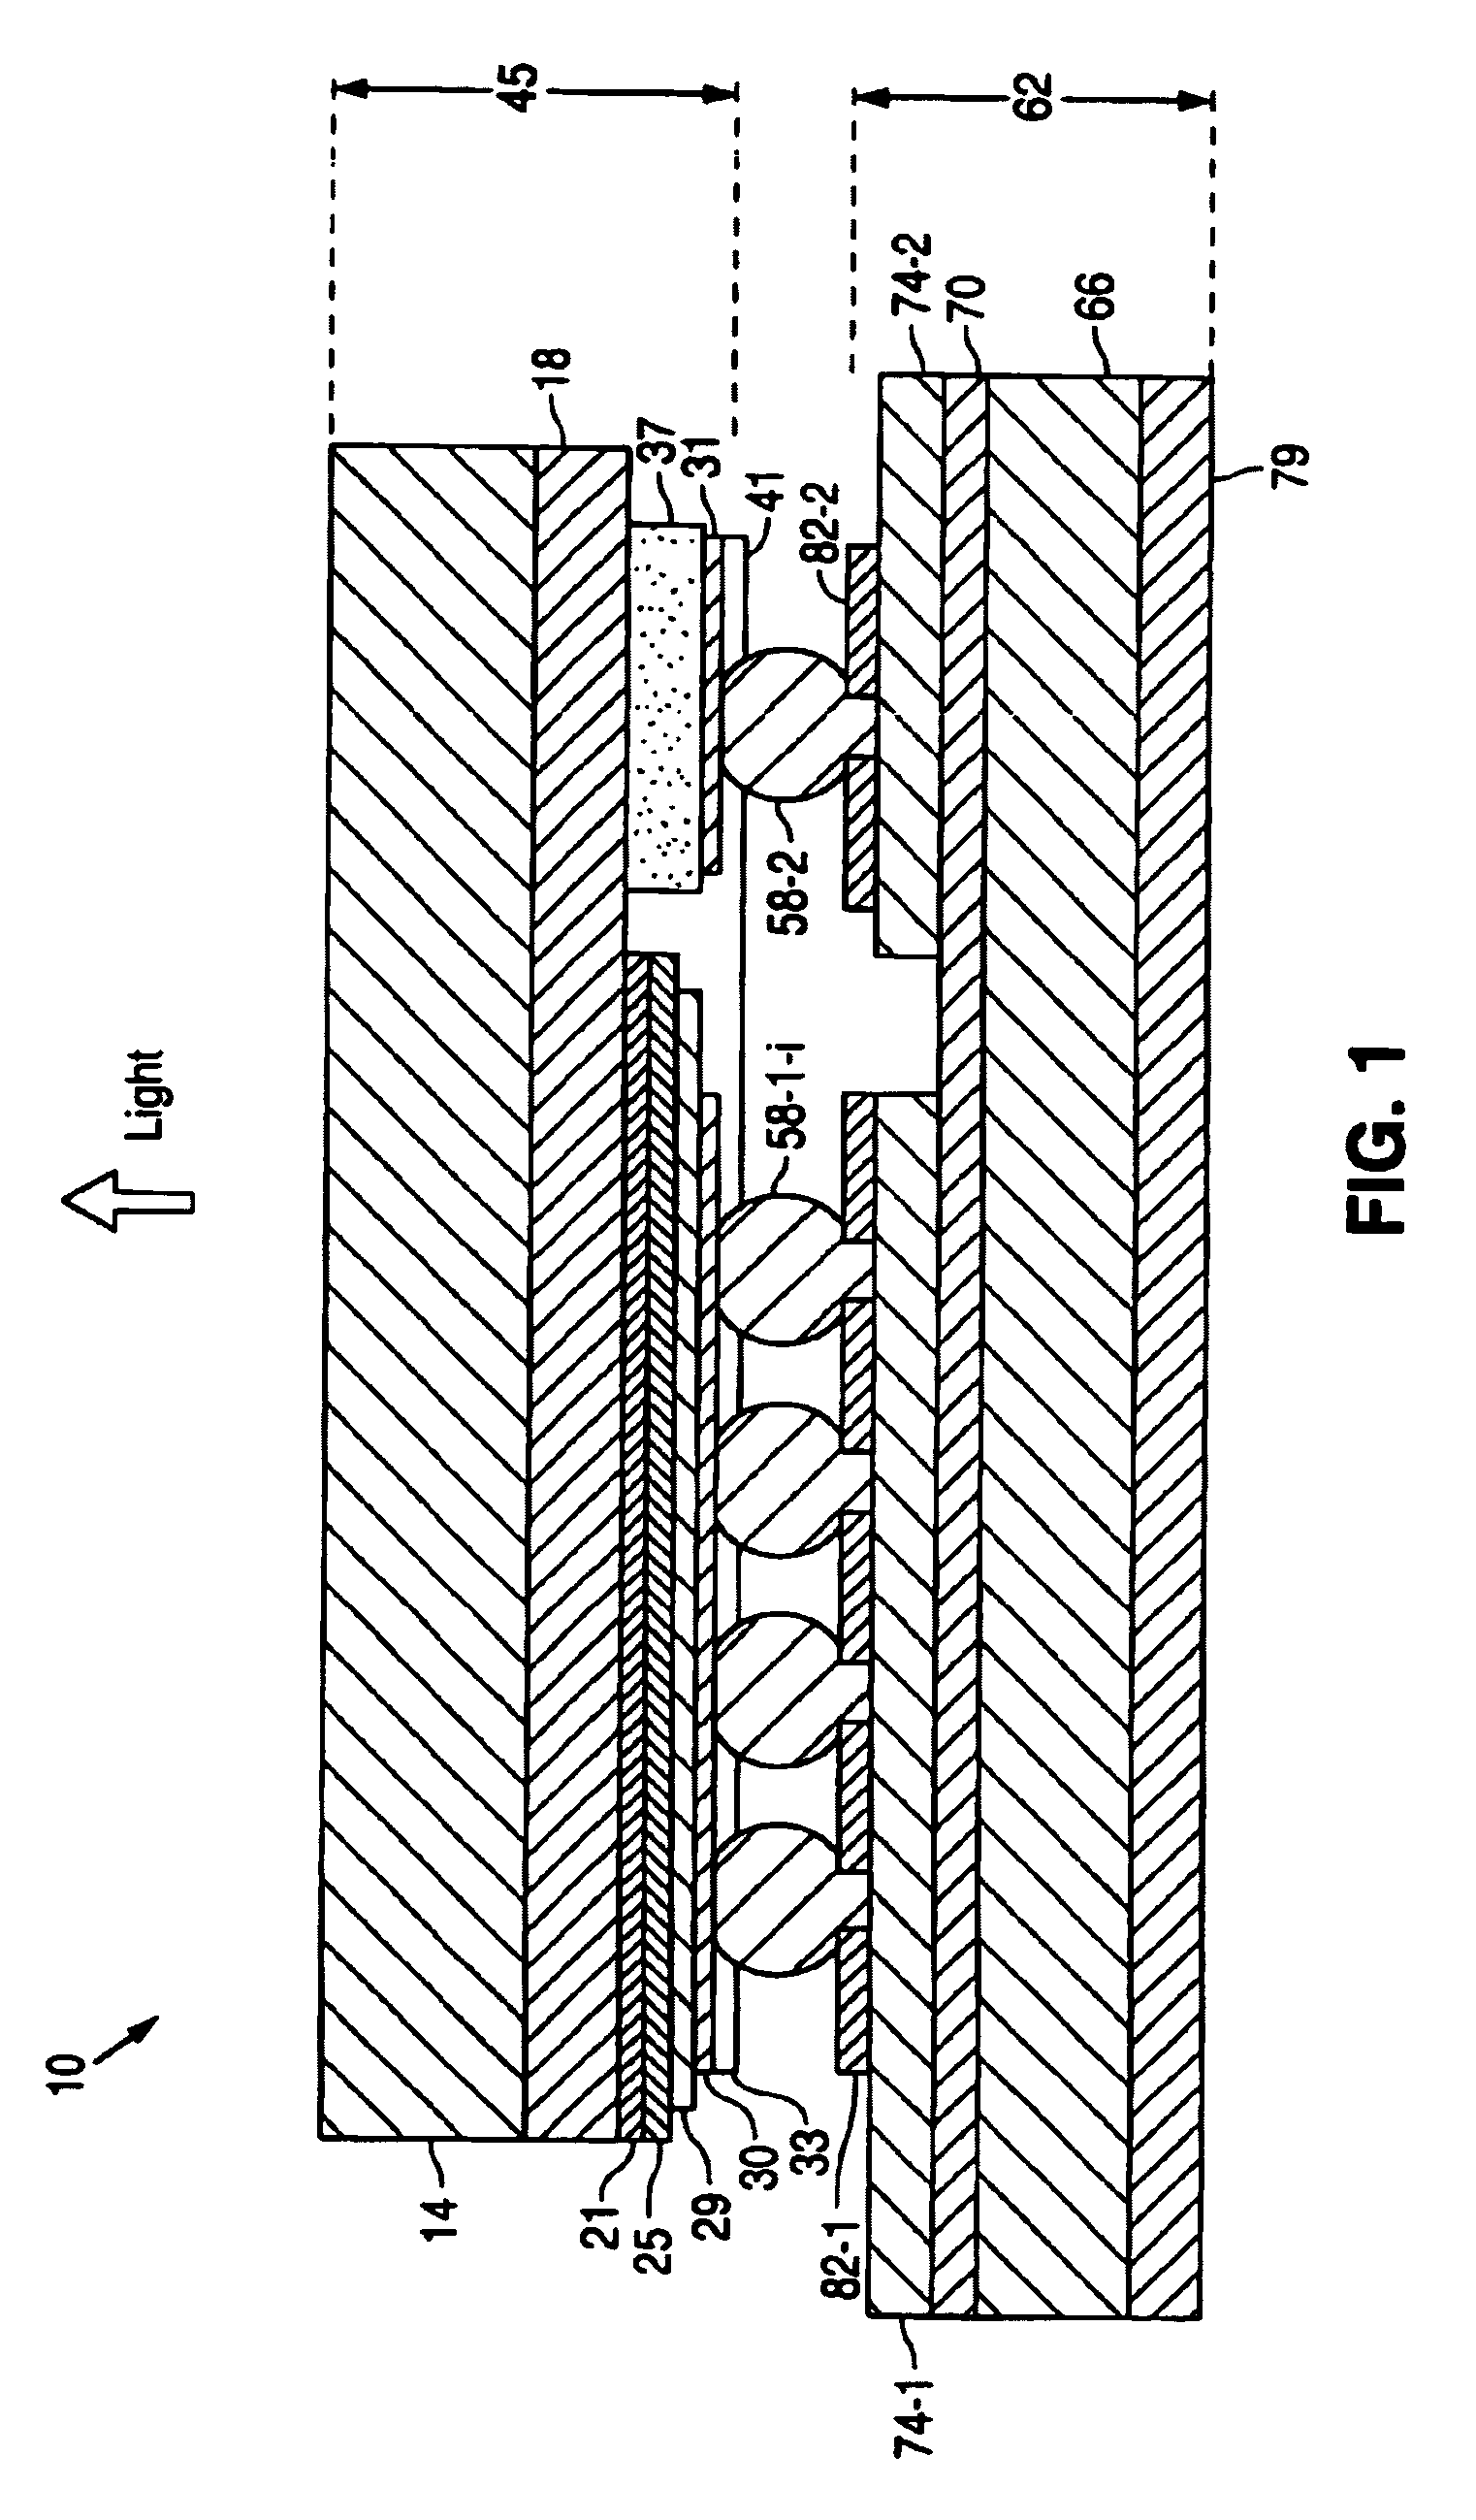 High-powered light emitting device with improved thermal properties